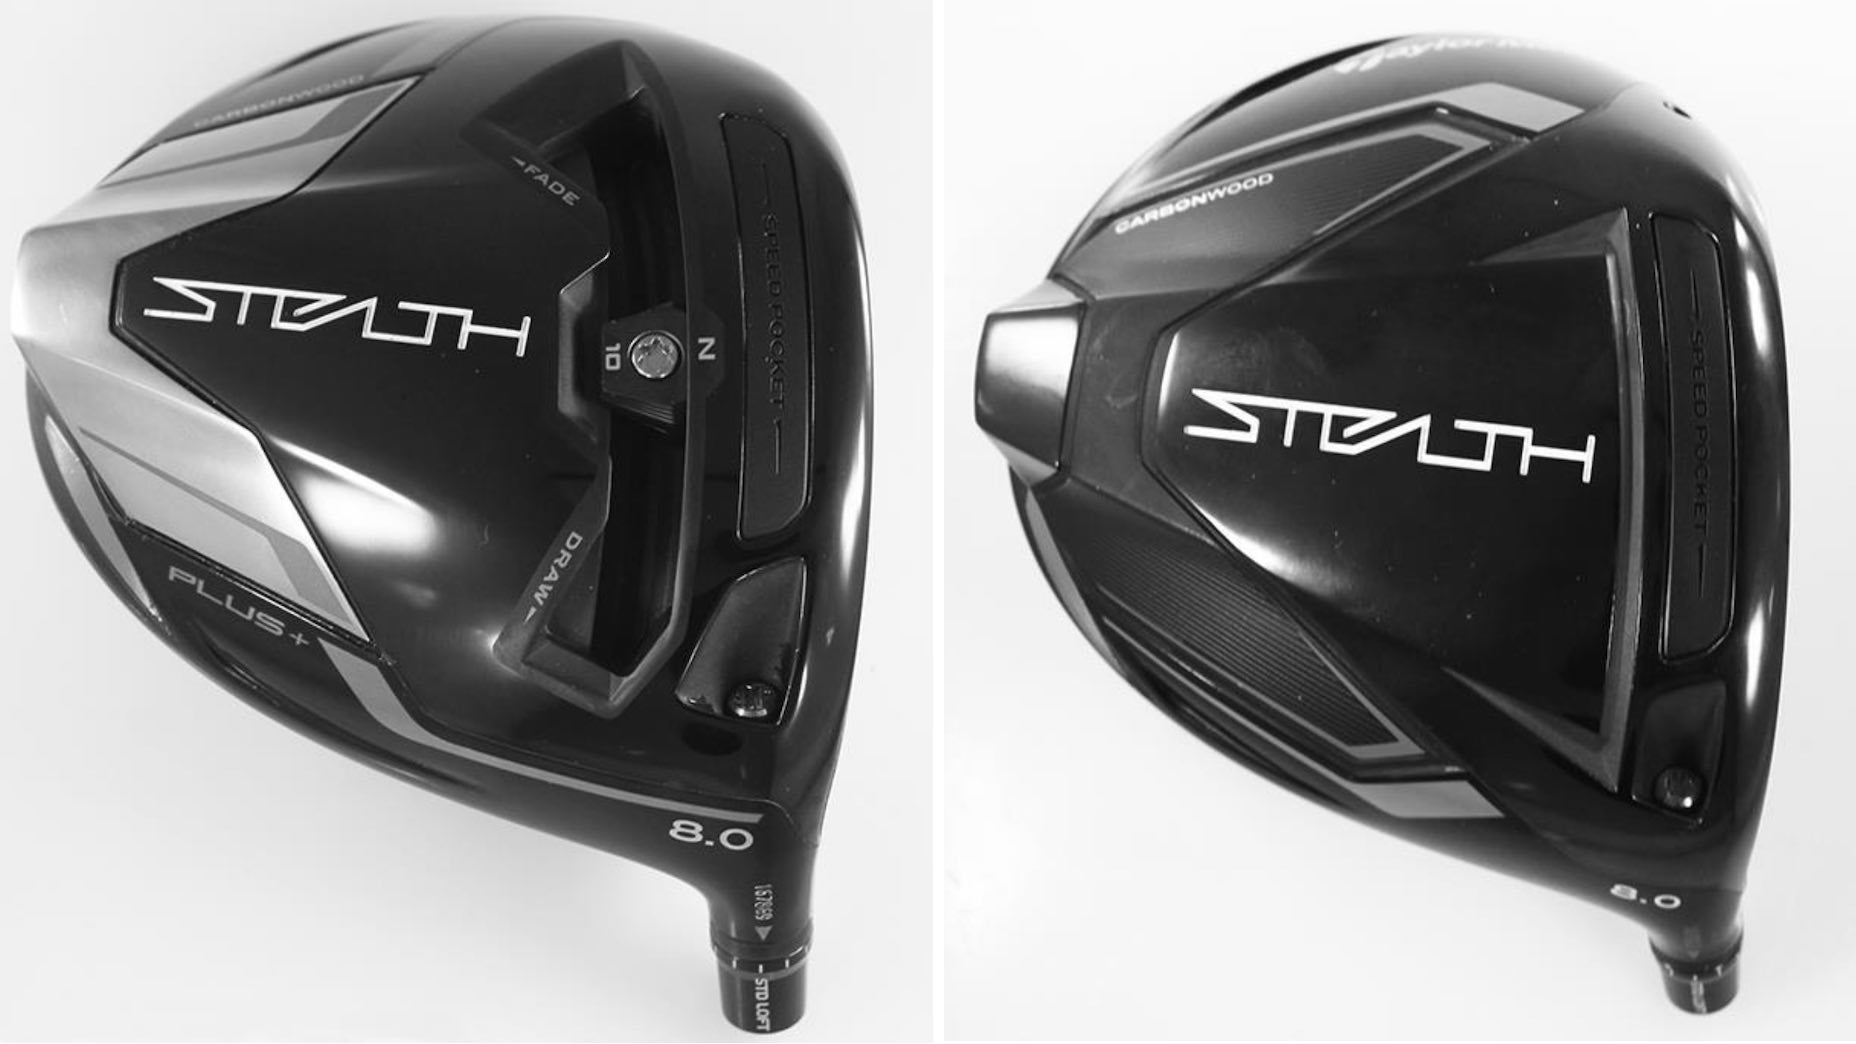 TaylorMade Stealth driver surfaces on USGA conforming list